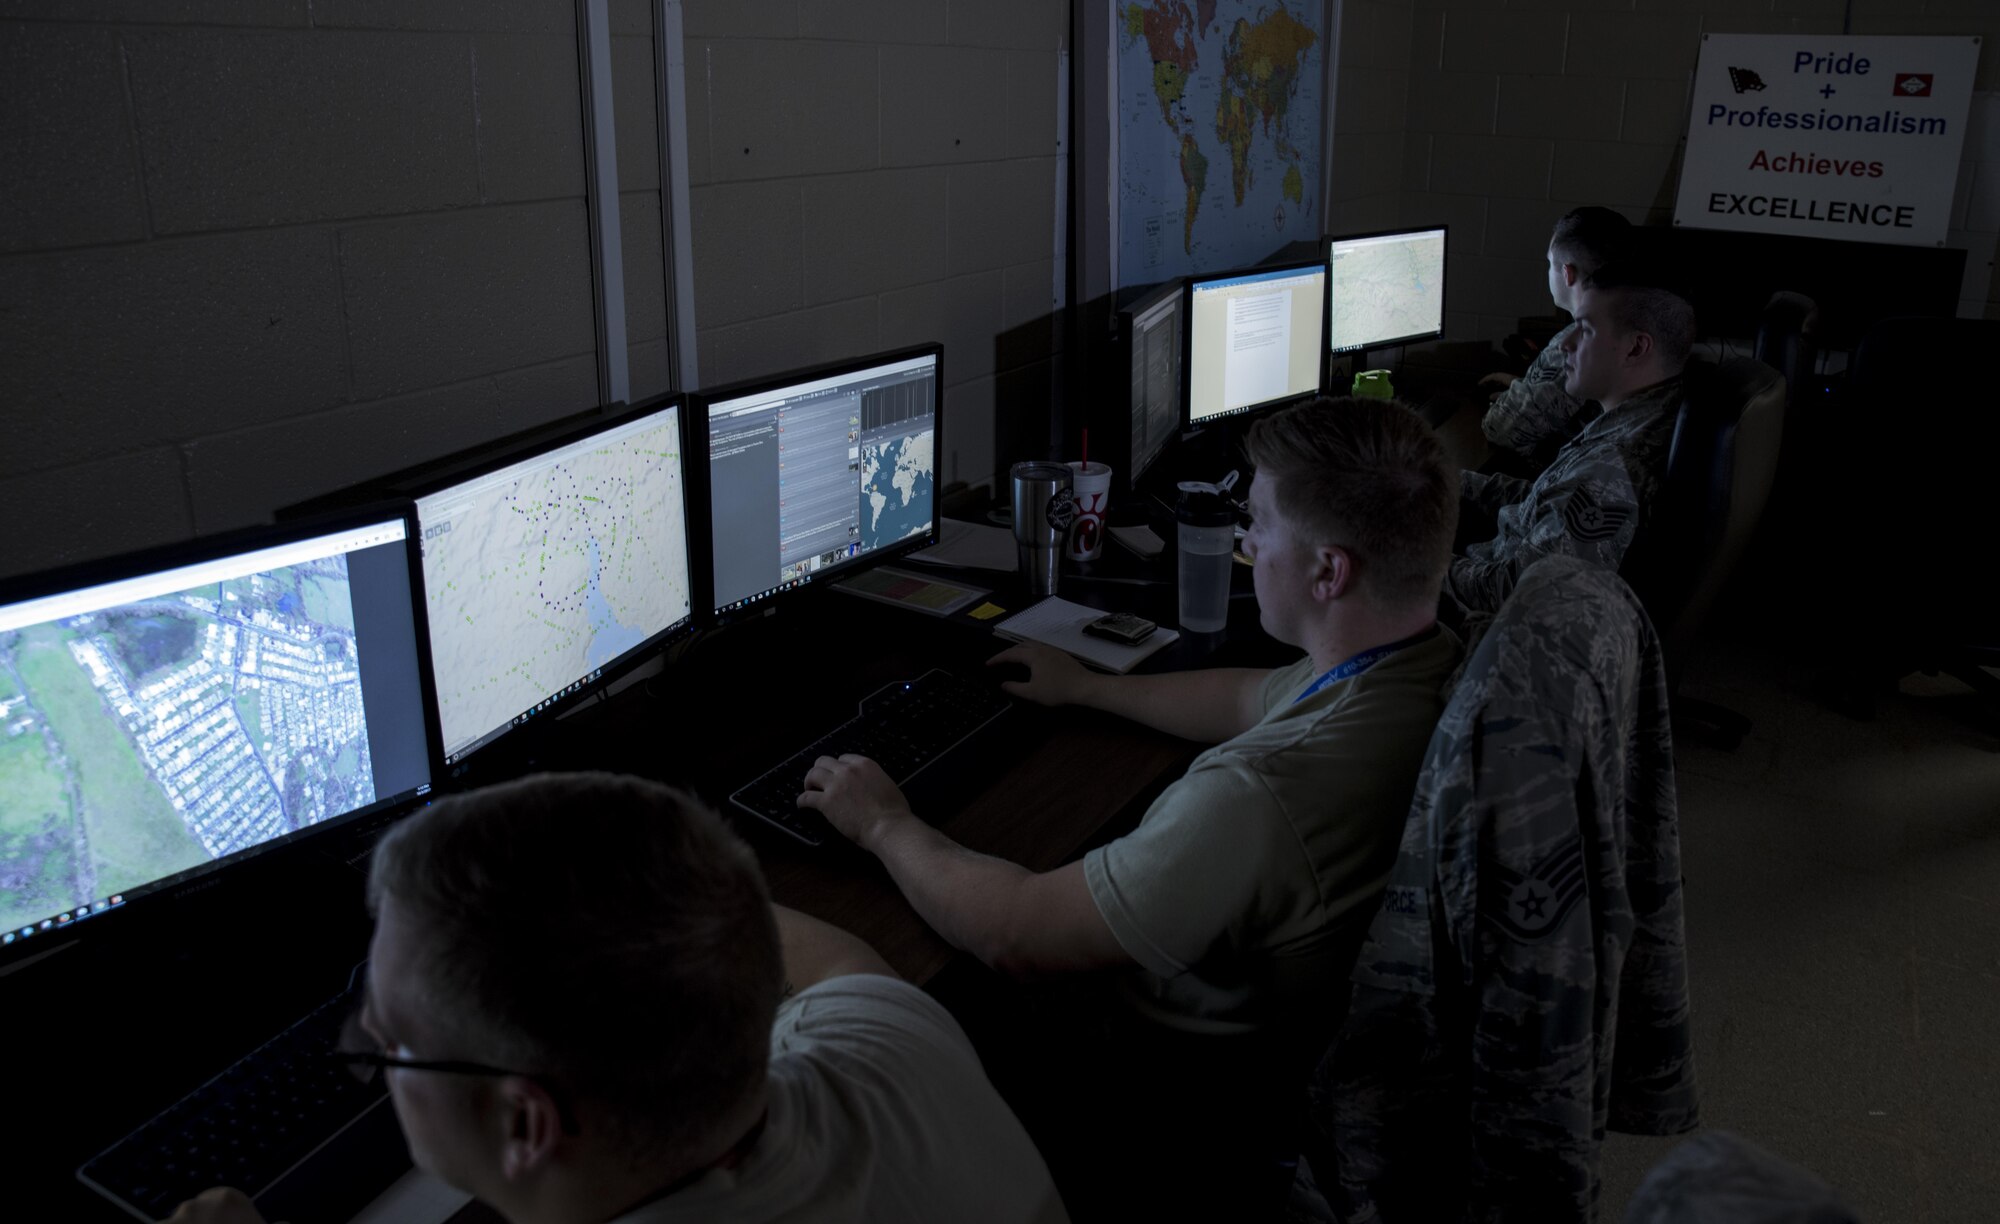 Four Airmen sit in a dark room looking at computer monitors that have over head imagery of locations in Puerto Rico. There is a sign in the background that reads "Pride + Professionalism achieves excellence".